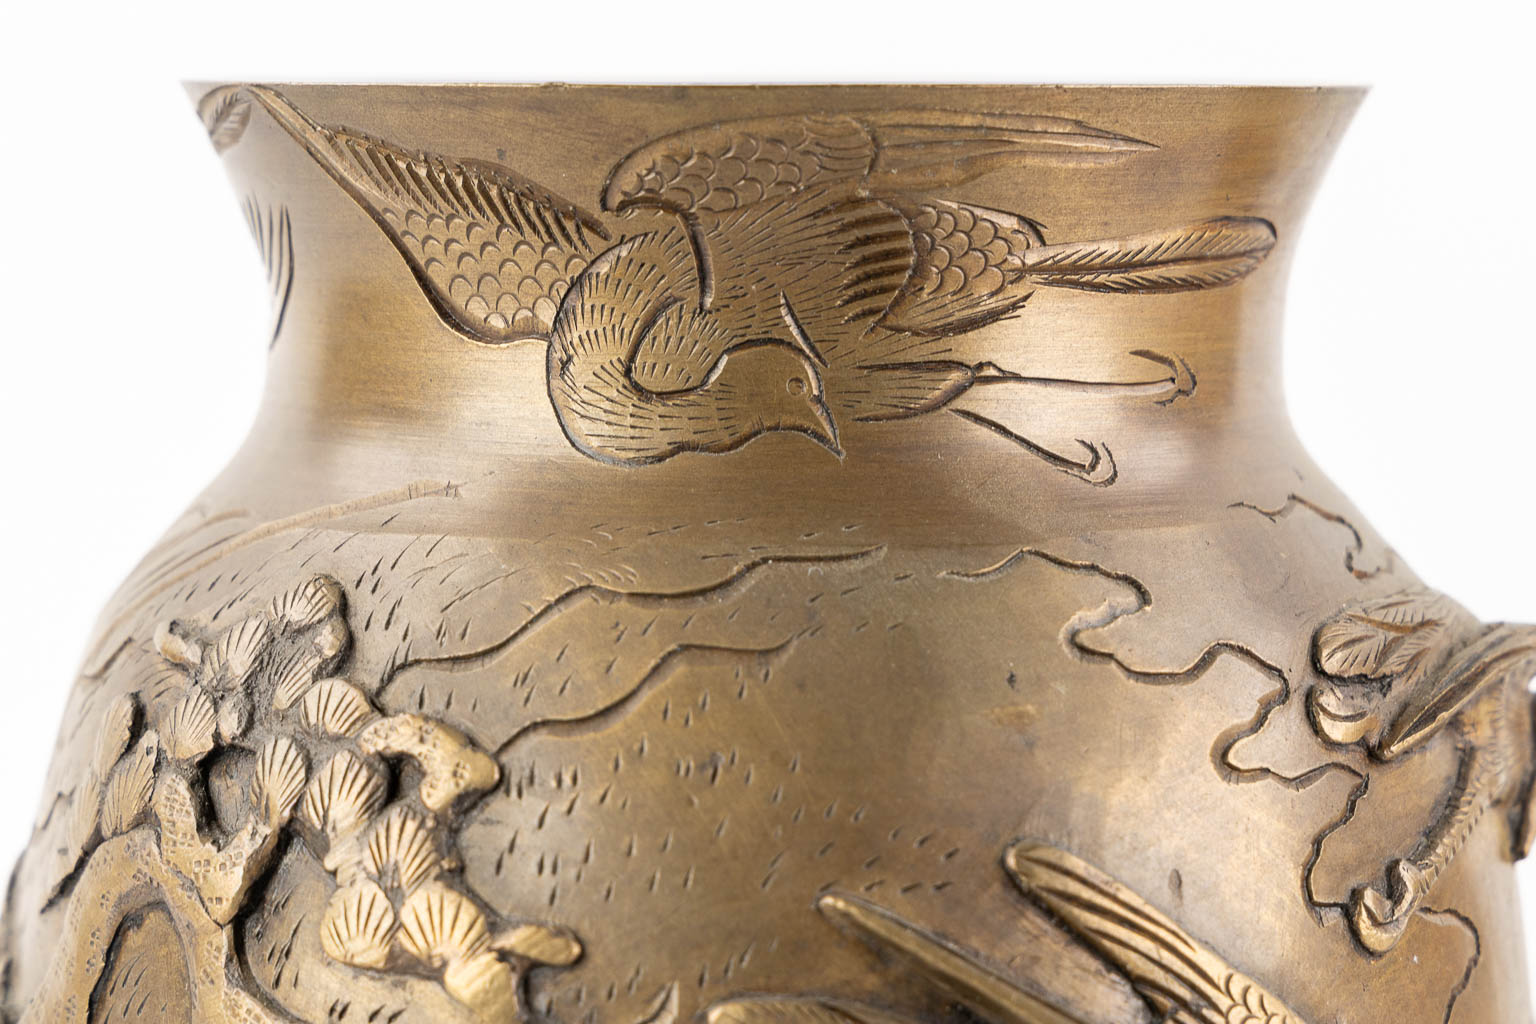 A pair of Oriental vases, depicting flying birds and trees. Patinated bronze. (H:27 x D:16 cm) - Image 14 of 16